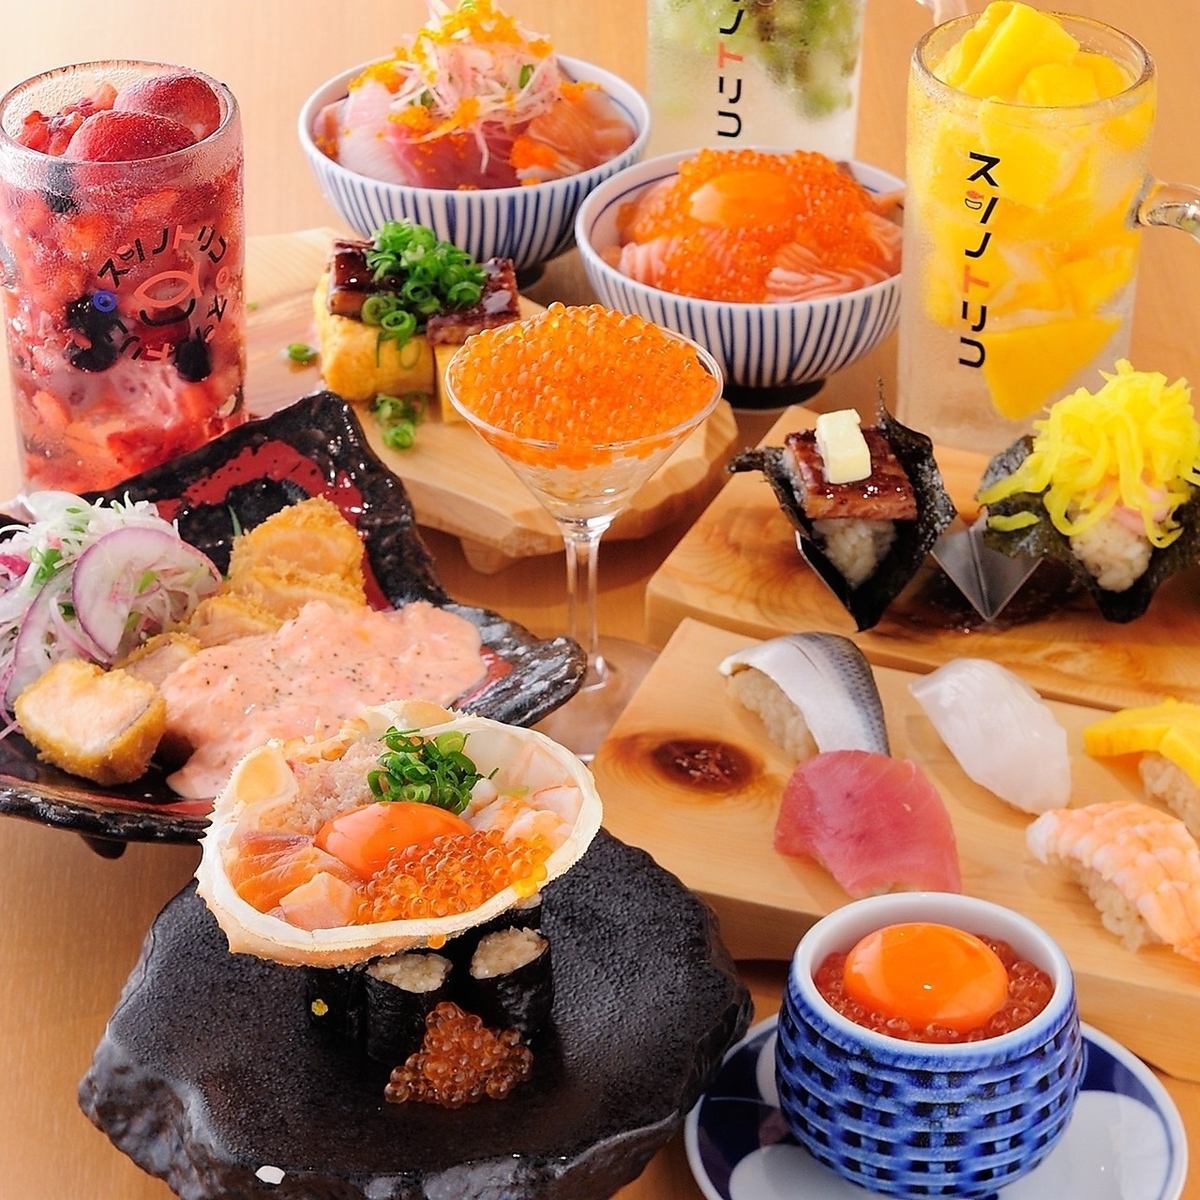 [You too can join Sushi No Toriko!] The ultimate sushi bar opens on April 26th!